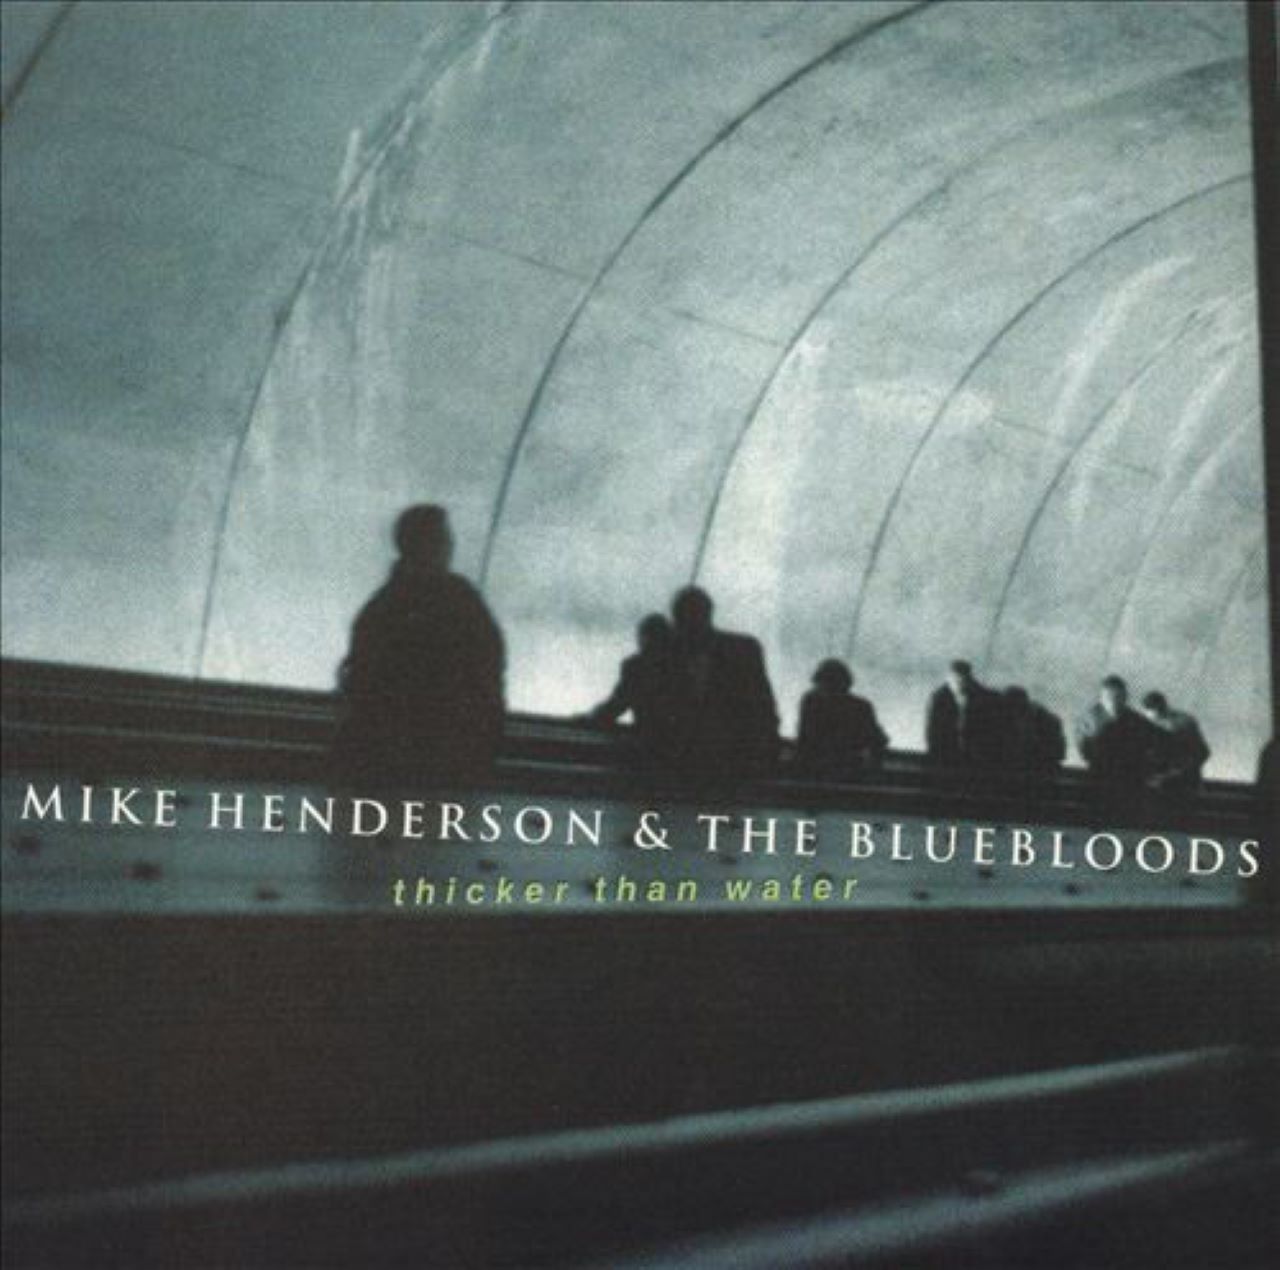 Mike Henderson & The Bluebloods - Thicker Than Water cover album